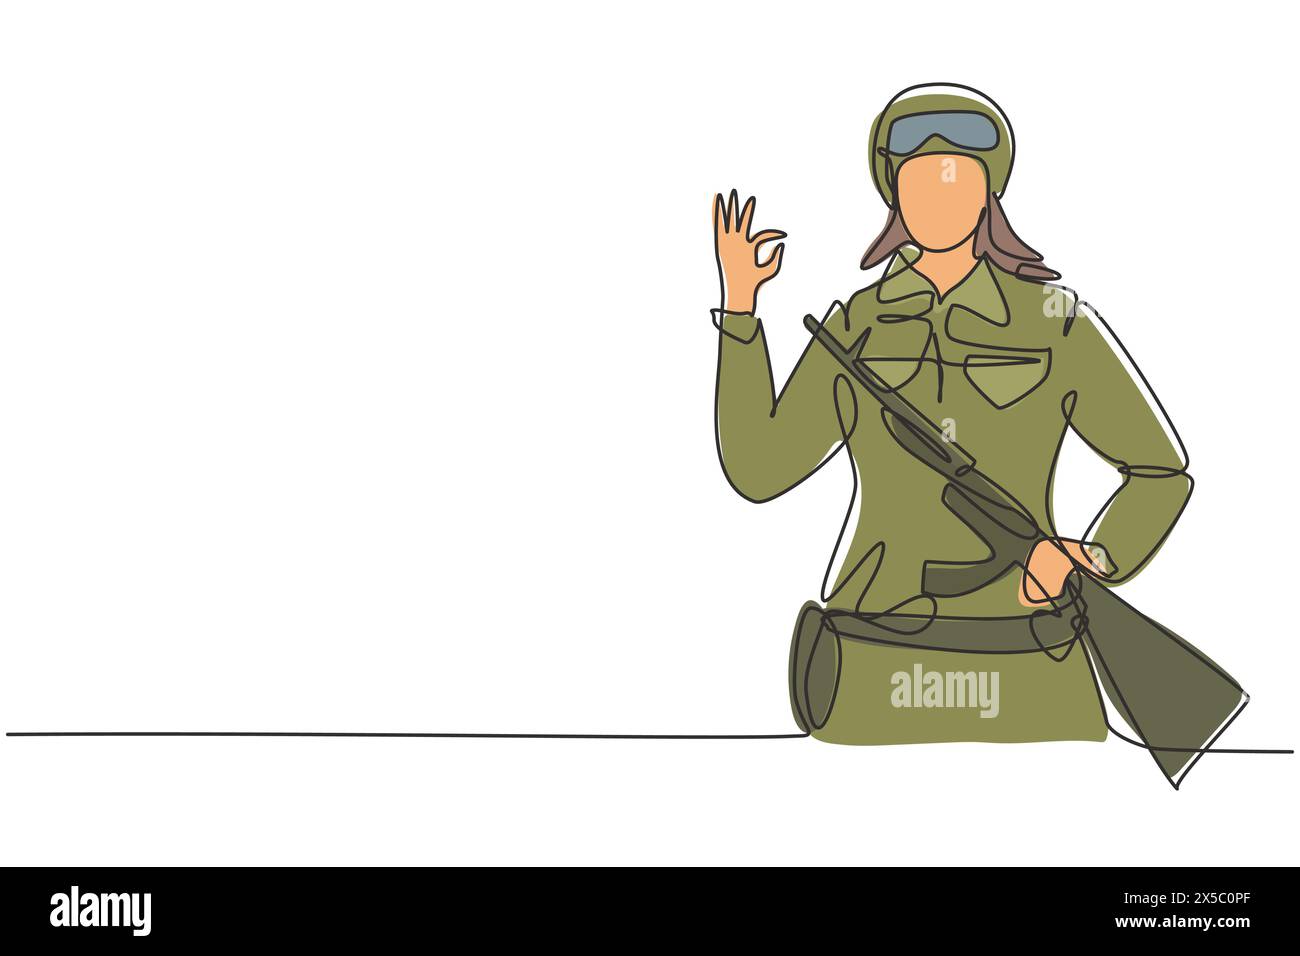 Single continuous line drawing female soldiers with weapon, uniform, gesture okay is ready to defend the country on battlefield against enemy. Dynamic Stock Vector